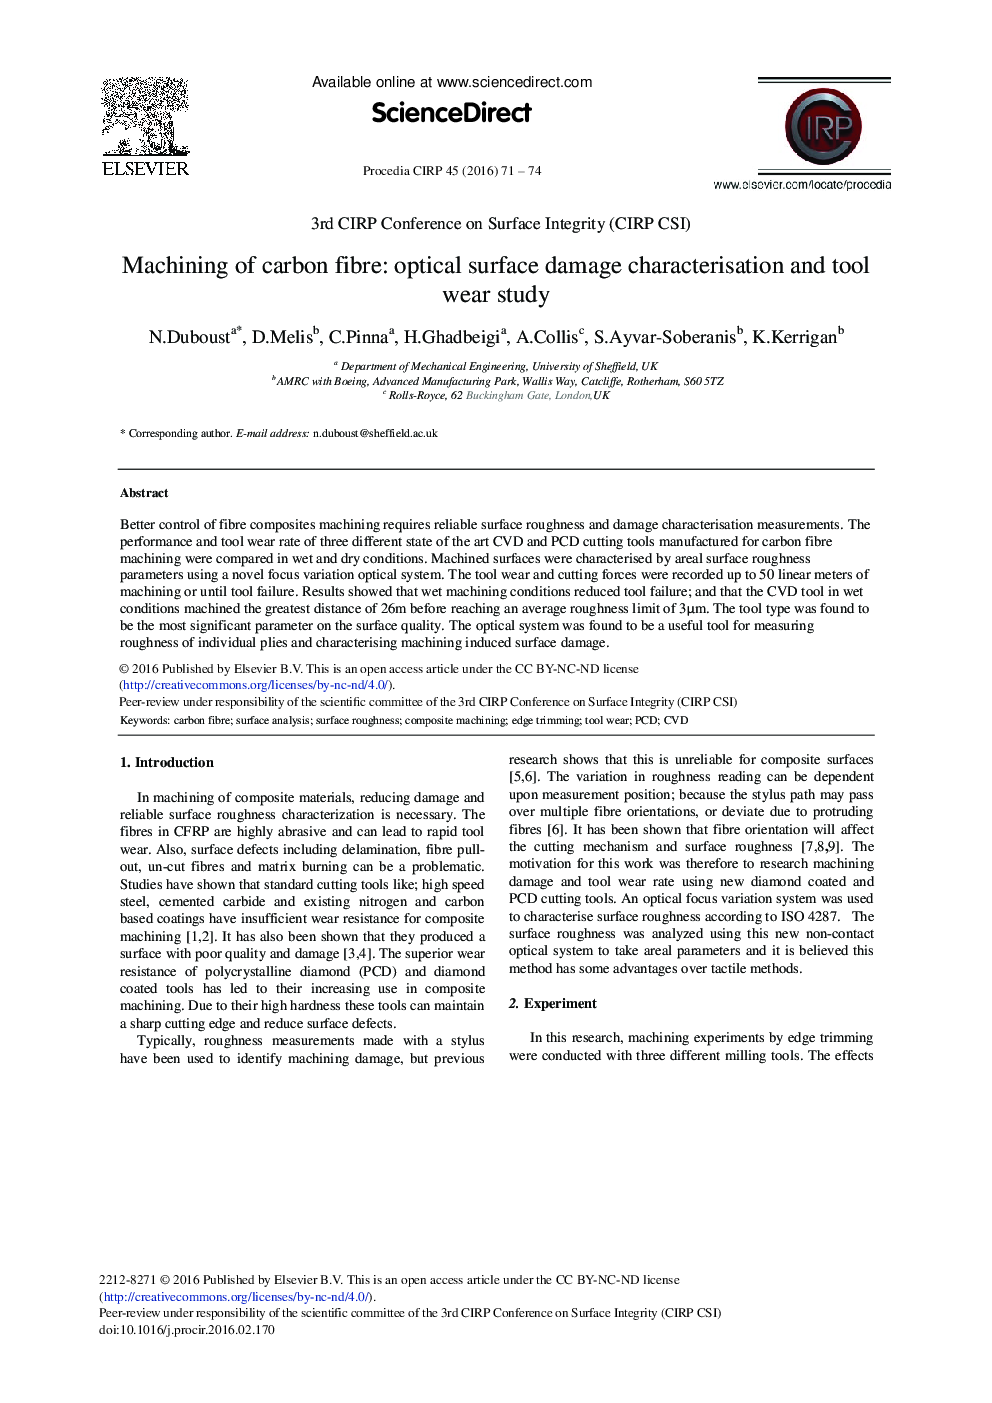 Machining of Carbon Fibre: Optical Surface Damage Characterisation and Tool Wear Study 